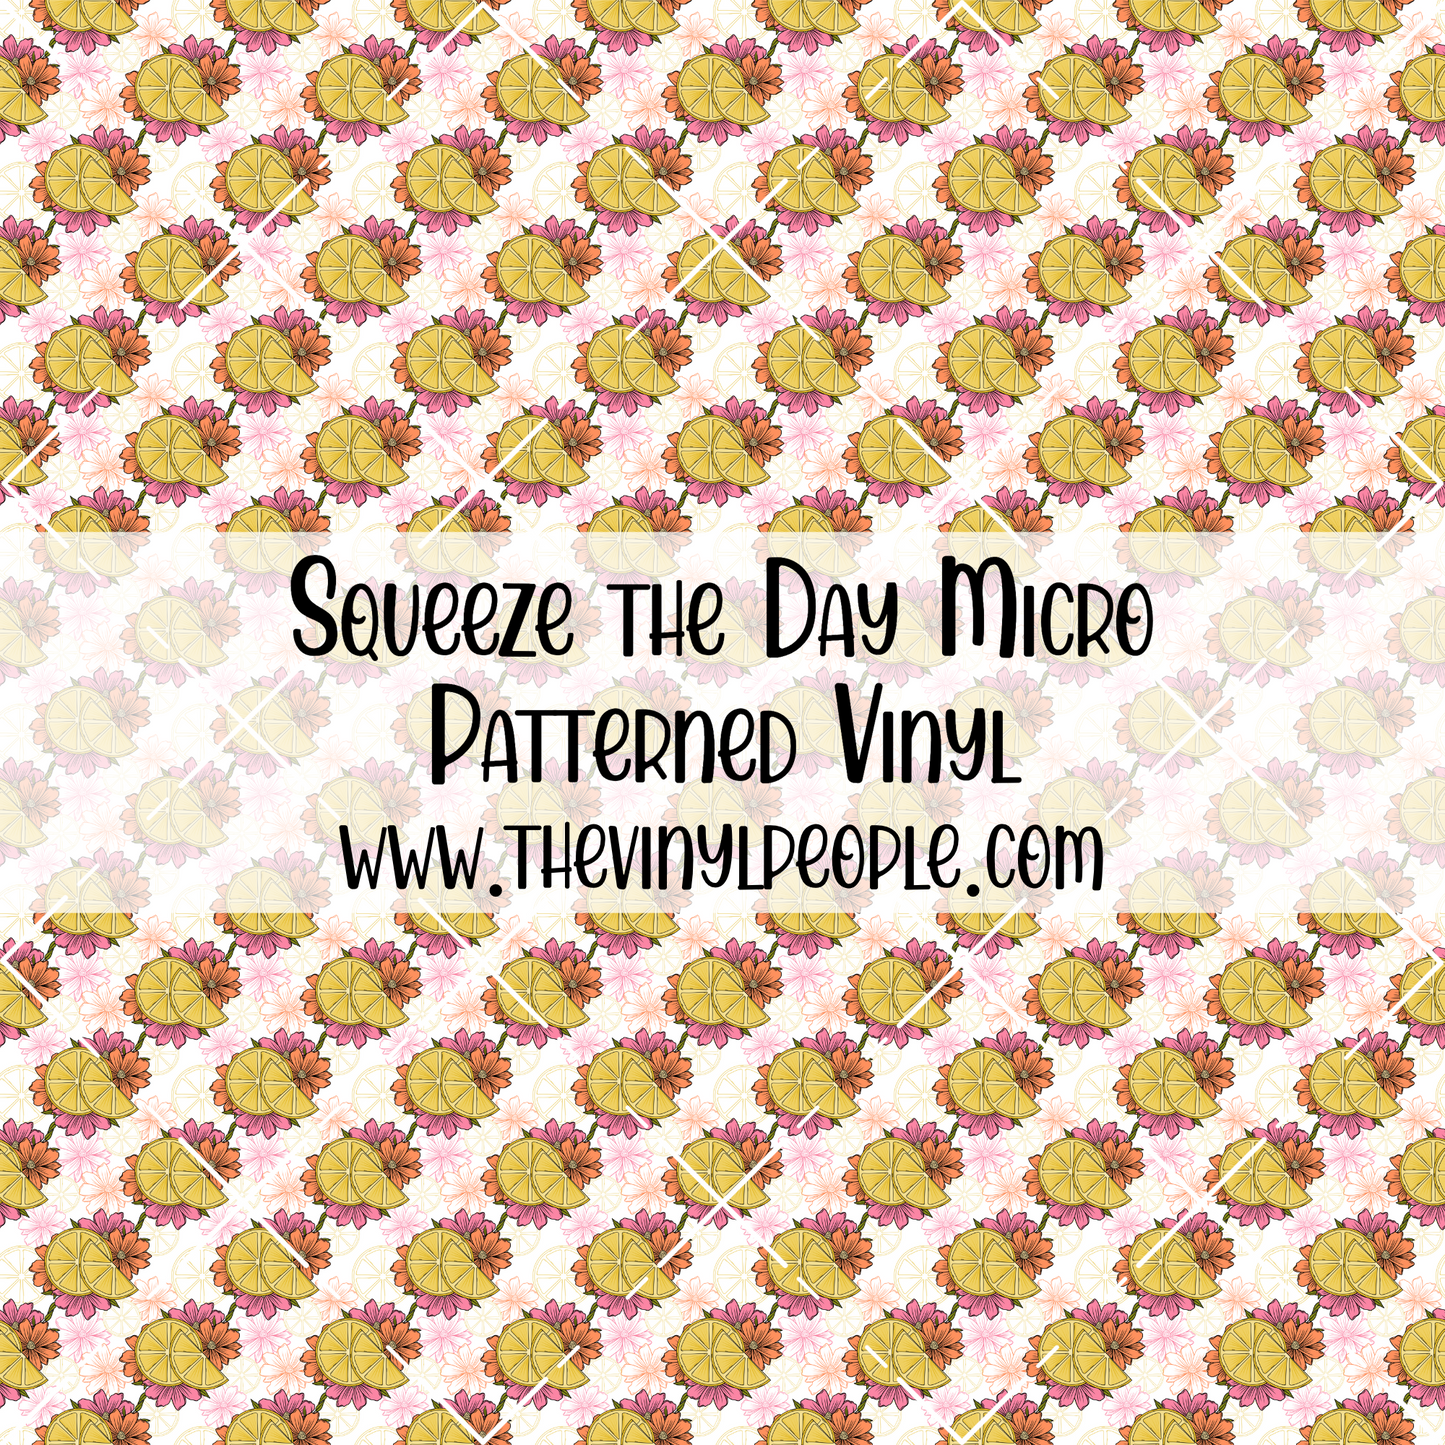 Squeeze the Day Patterned Vinyl